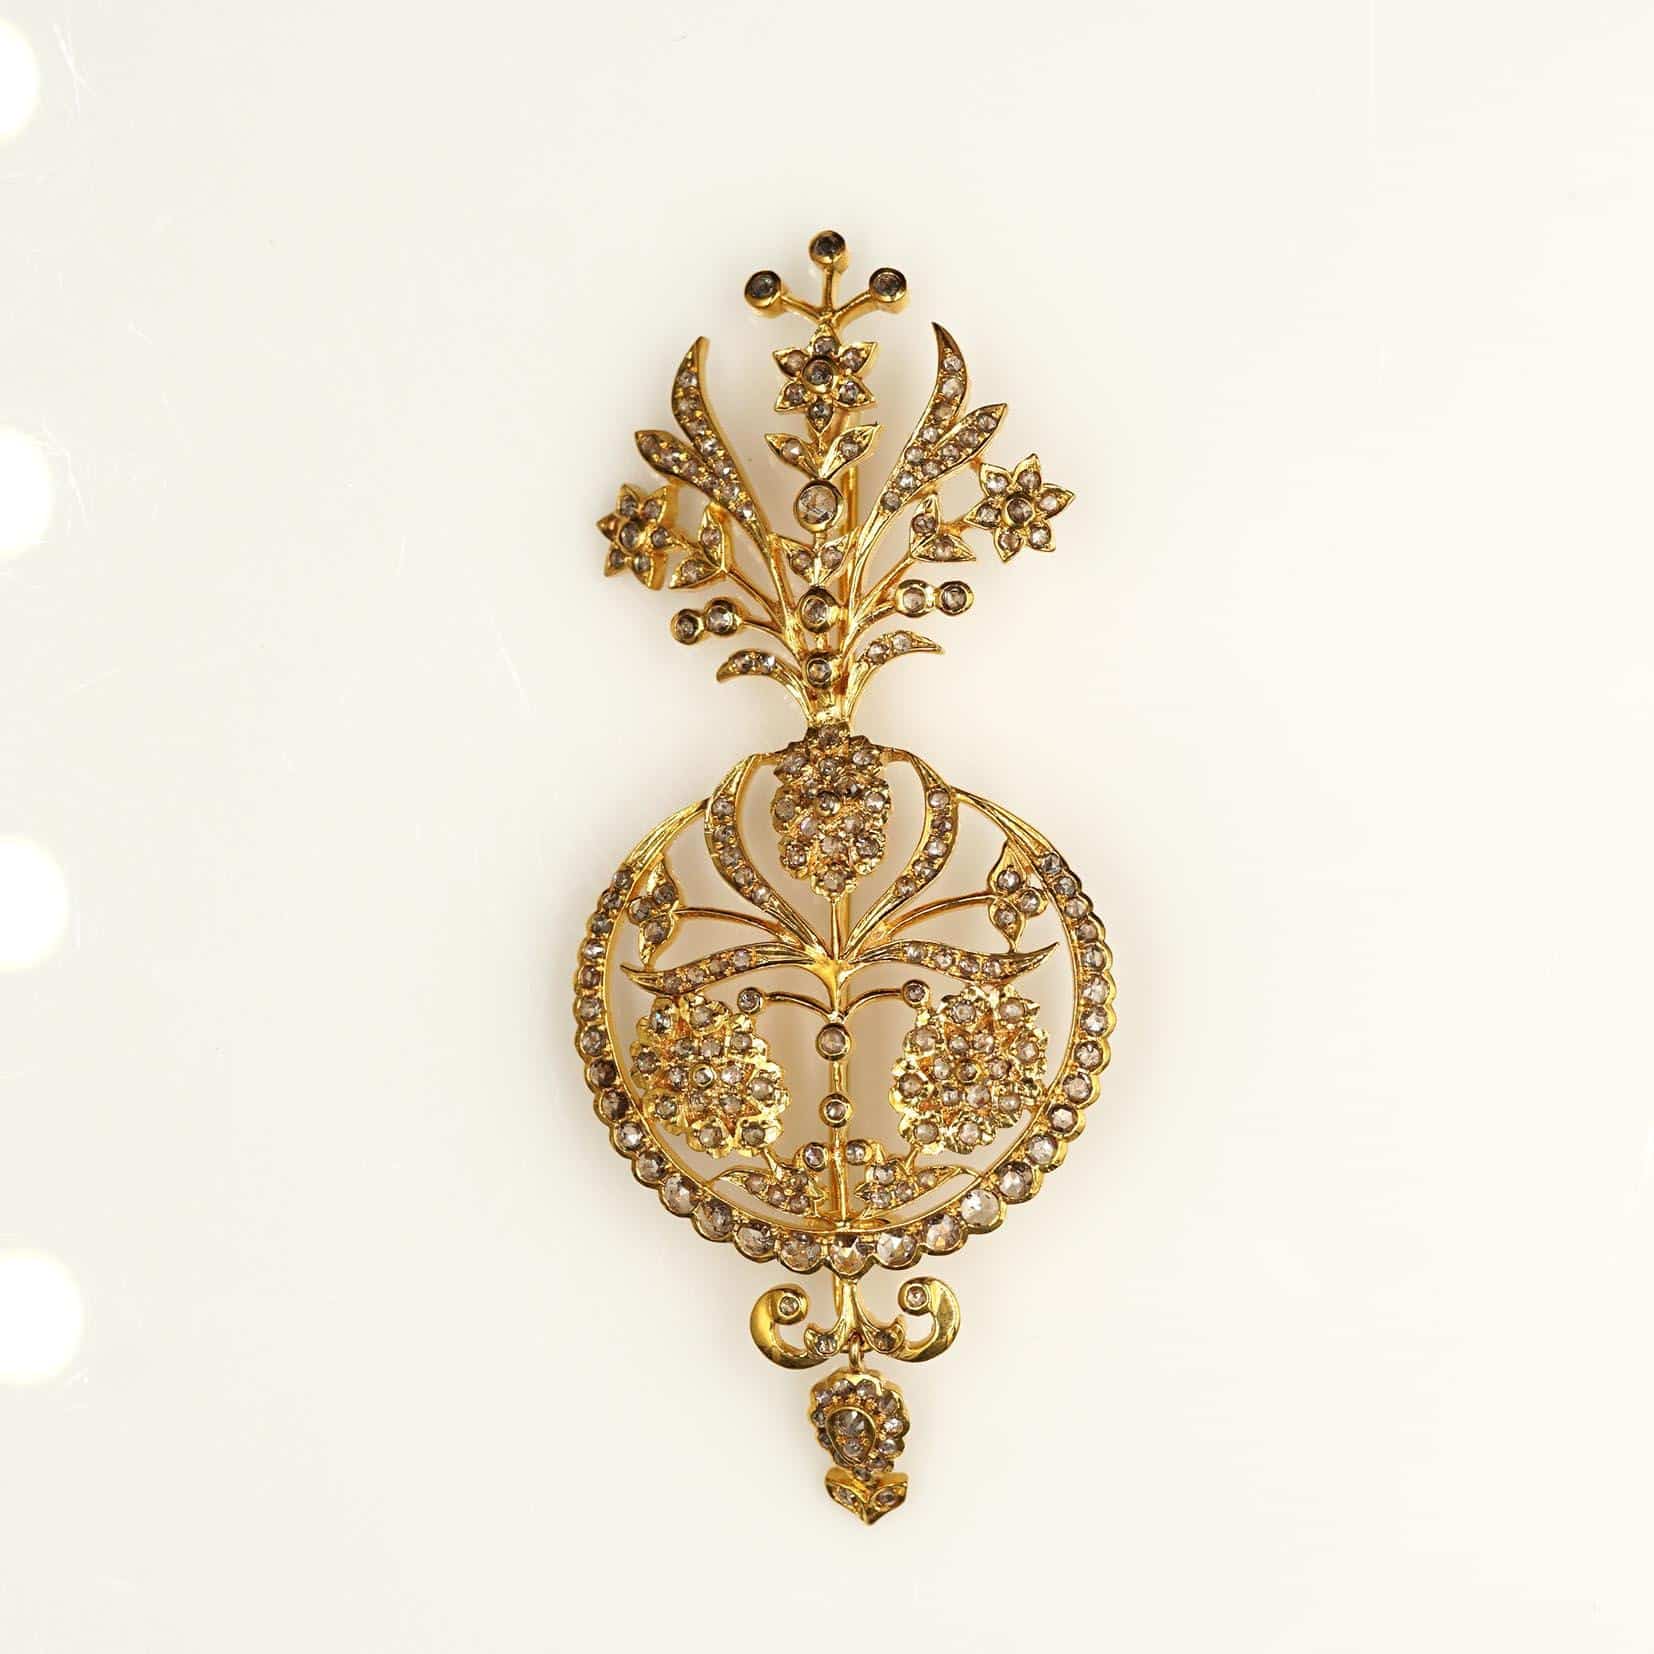 Brooch Jewelry Gold with design of a detailed crown, Buy now!